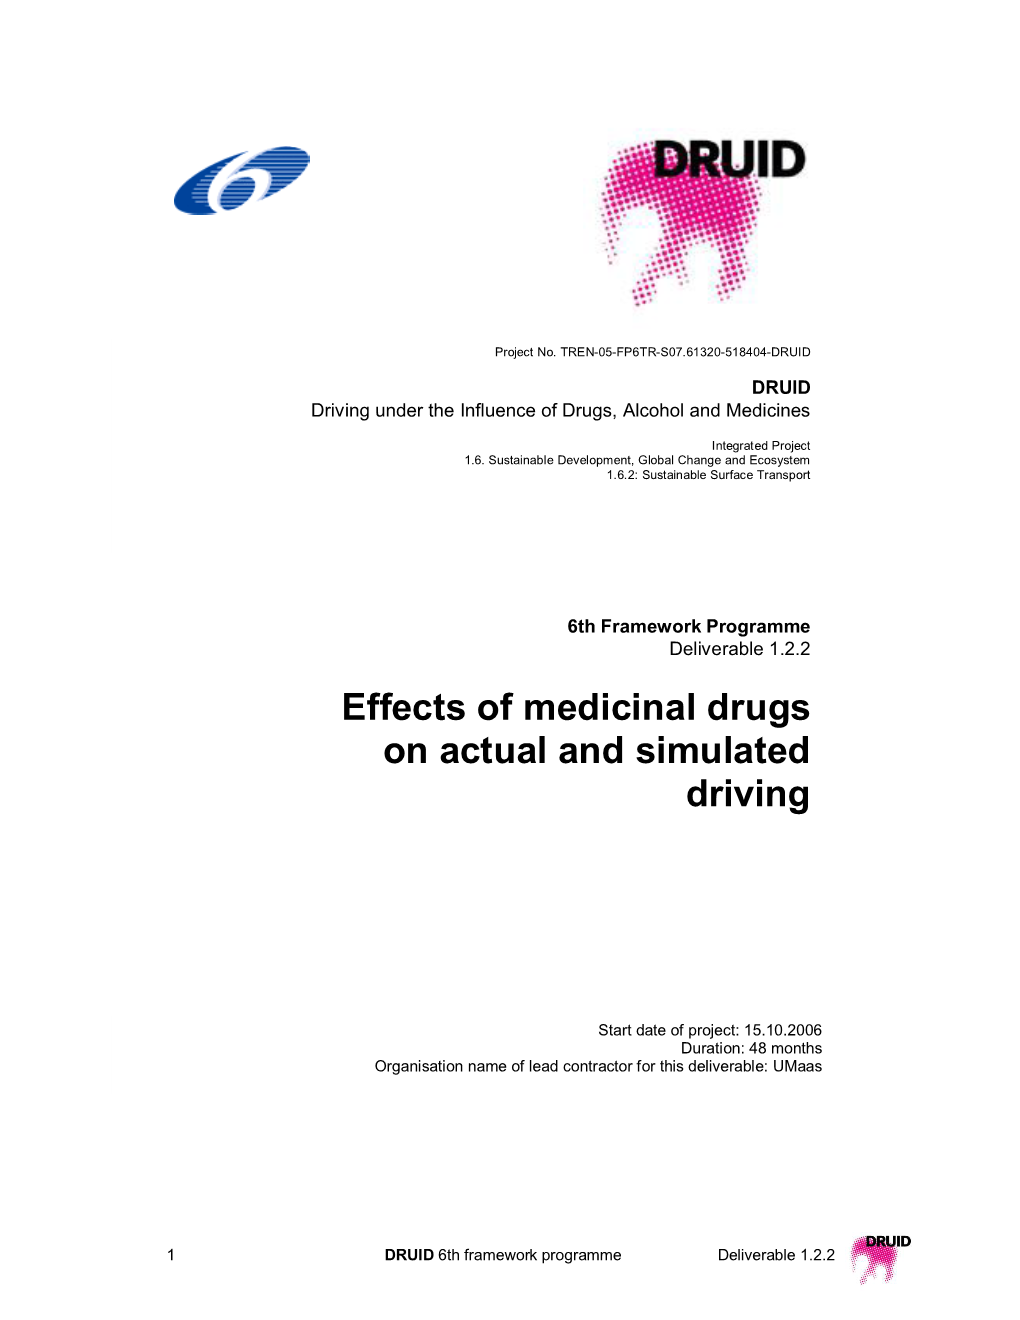 Download File "Effects of Medicinal Drugs on Actual and Simulated